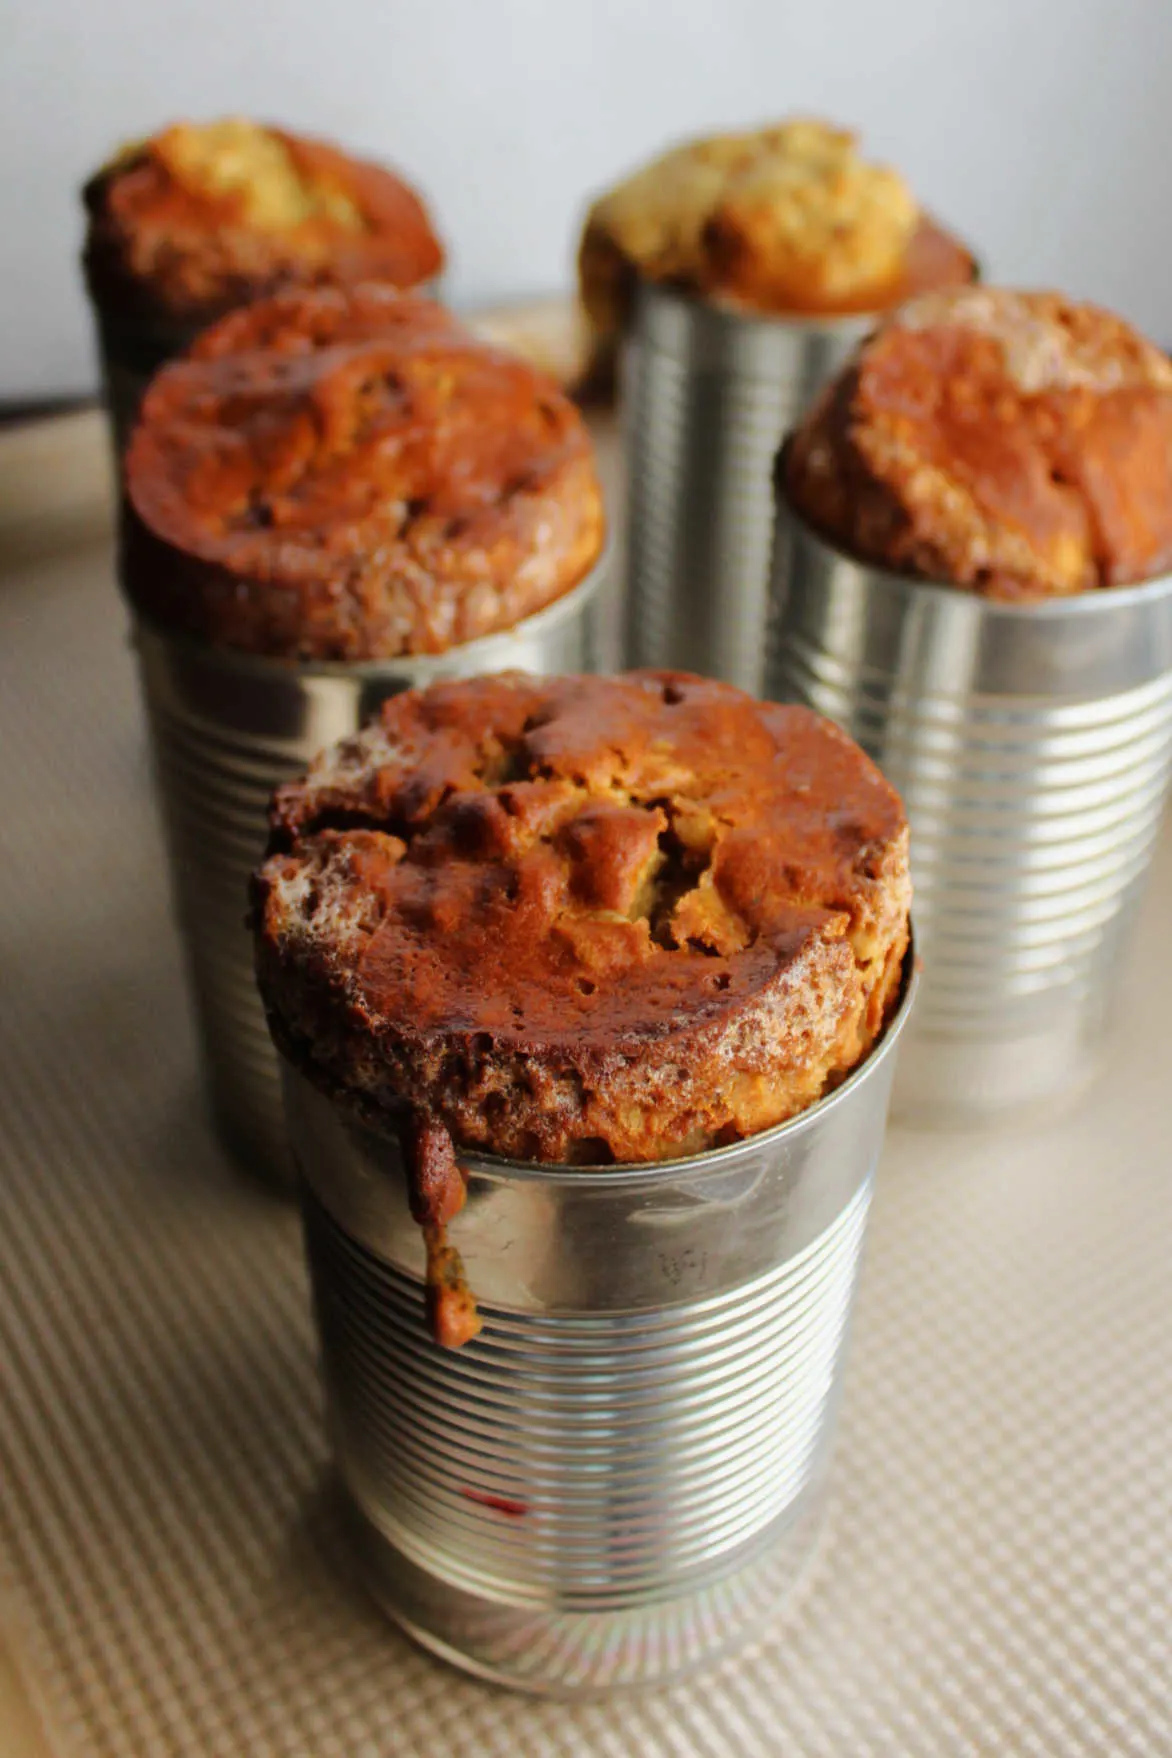 Date nut bread in cans fresh out of the oven.